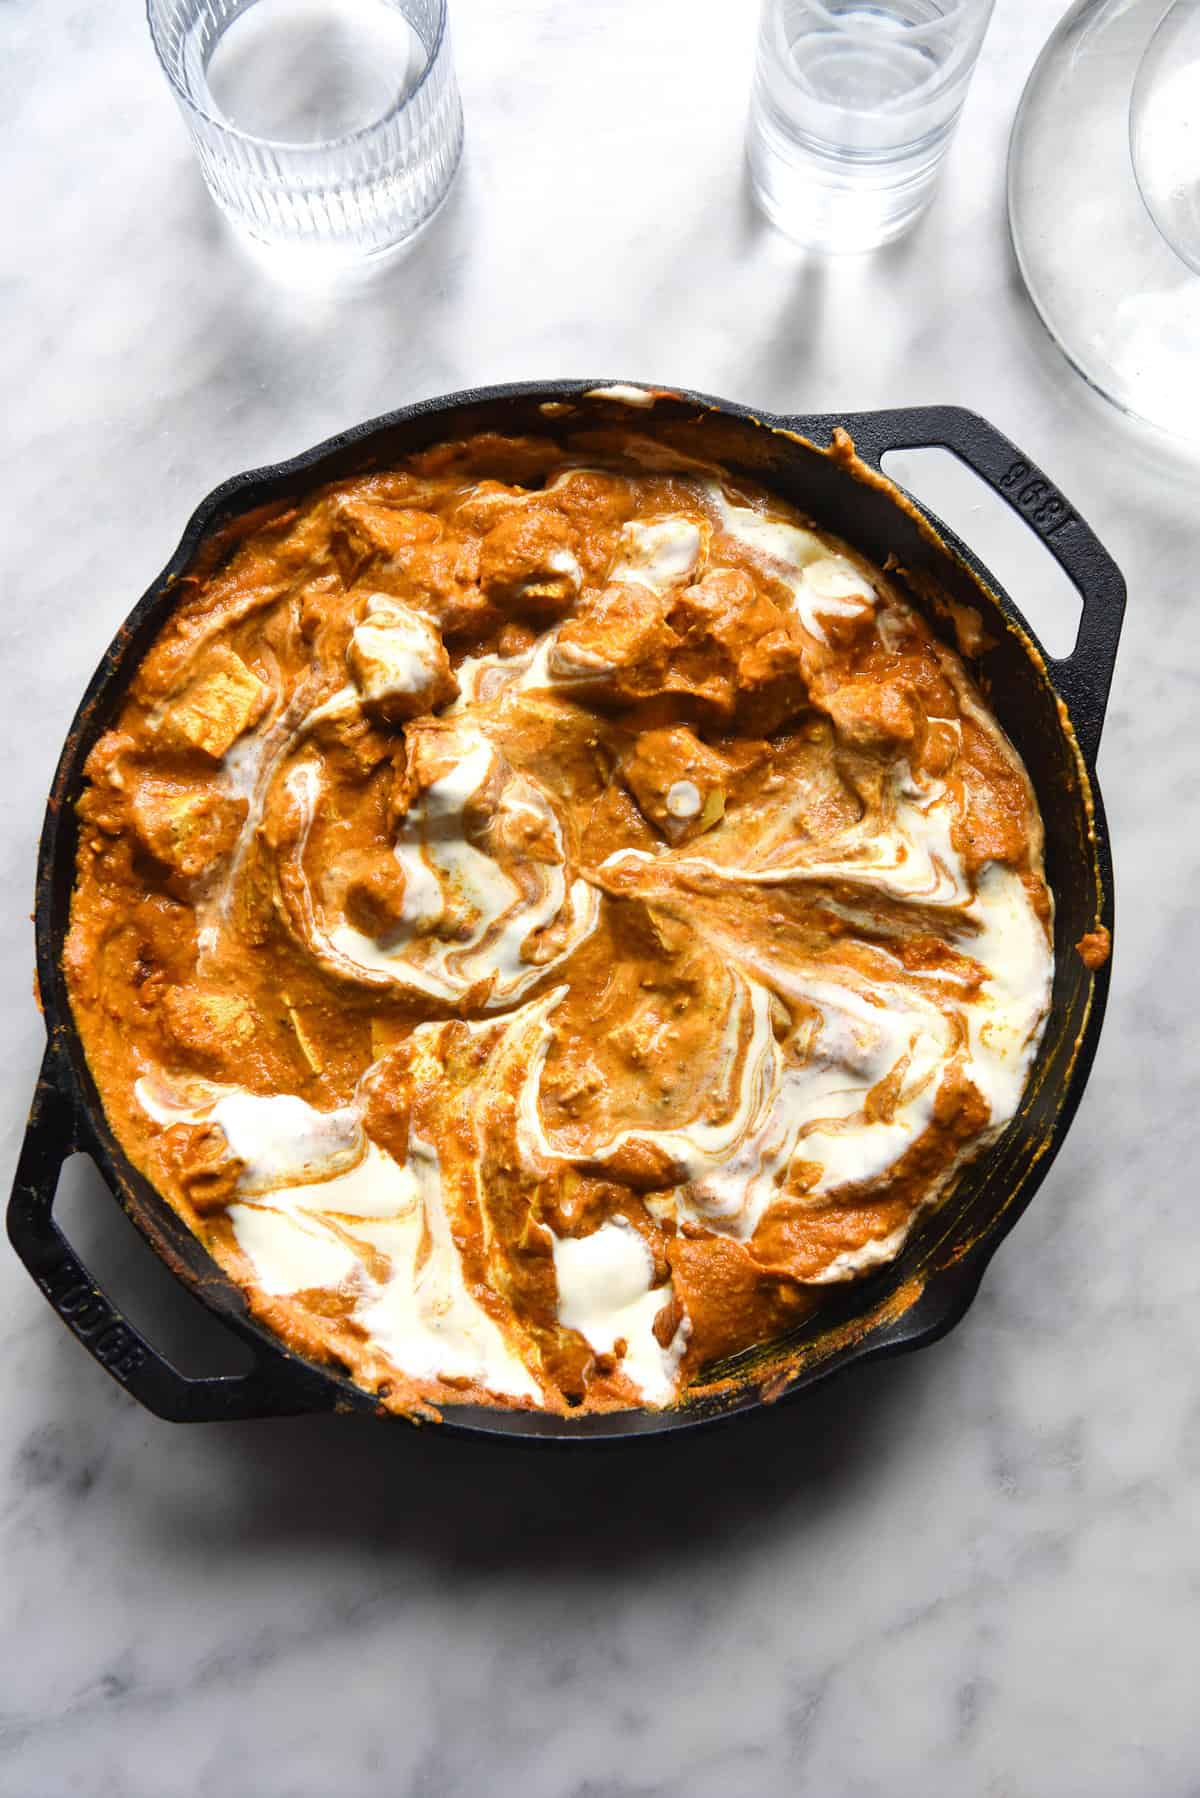 An aerial view of a skillet filled with FODMAP friendly vegetarian curry. The vibrant orange curry gravy is swirled with white coconut milk, creating a beautiful marbled effect. Pieces of tofu poke out from the gravy. The skillet is set on a white marble backdrop, and some glasses of water sit in the top of the image.